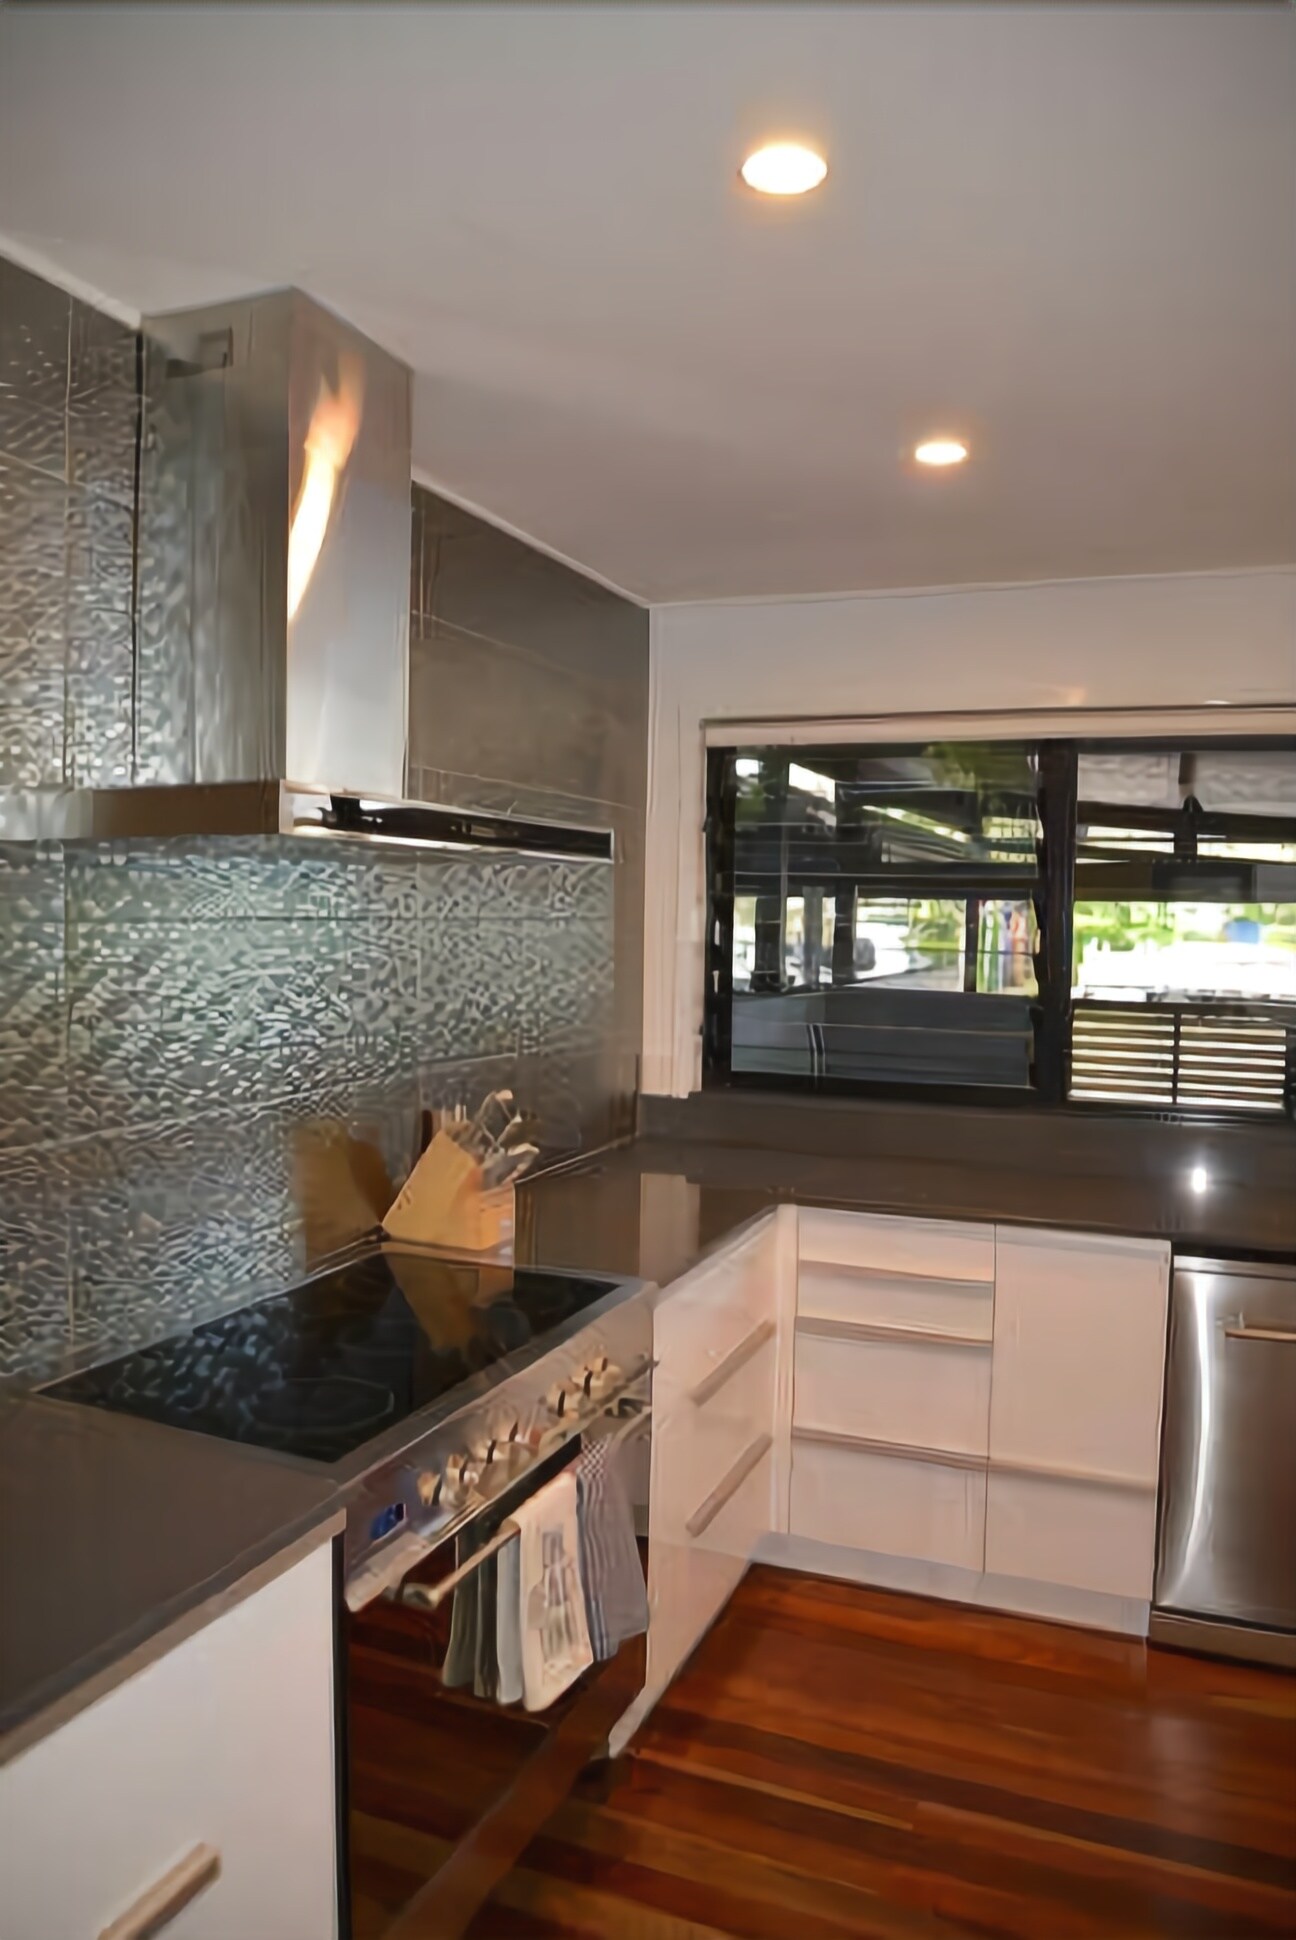 Stunning 2bed/2bth in Heart of Cottontrees 3blk Beach+river +restaurants Dogs OK